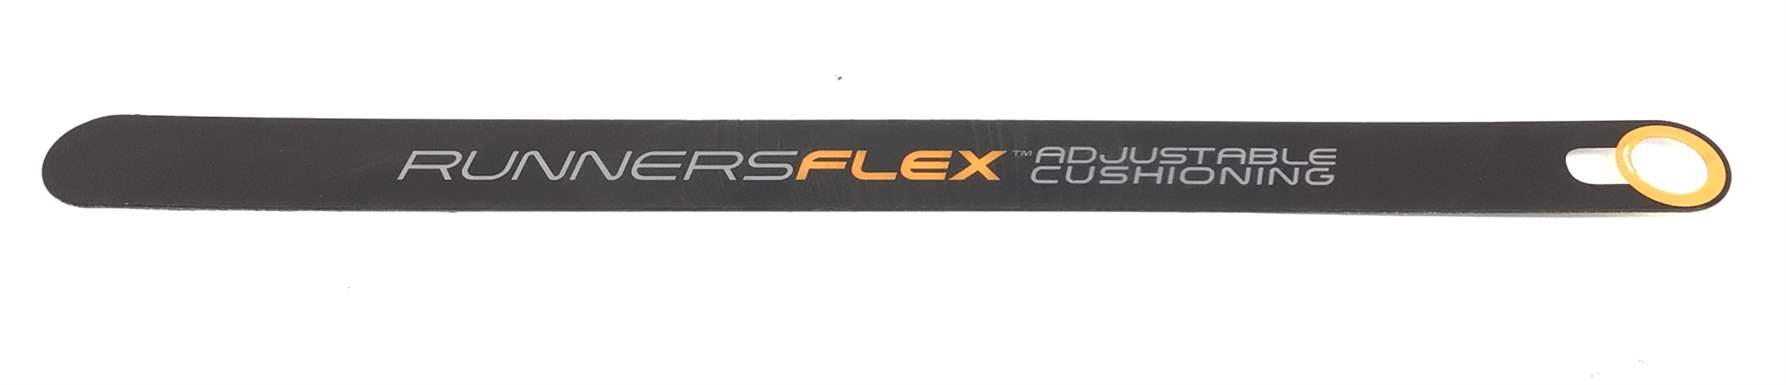 Right Runners Flex Adjustable Cushioning Decal (Used)